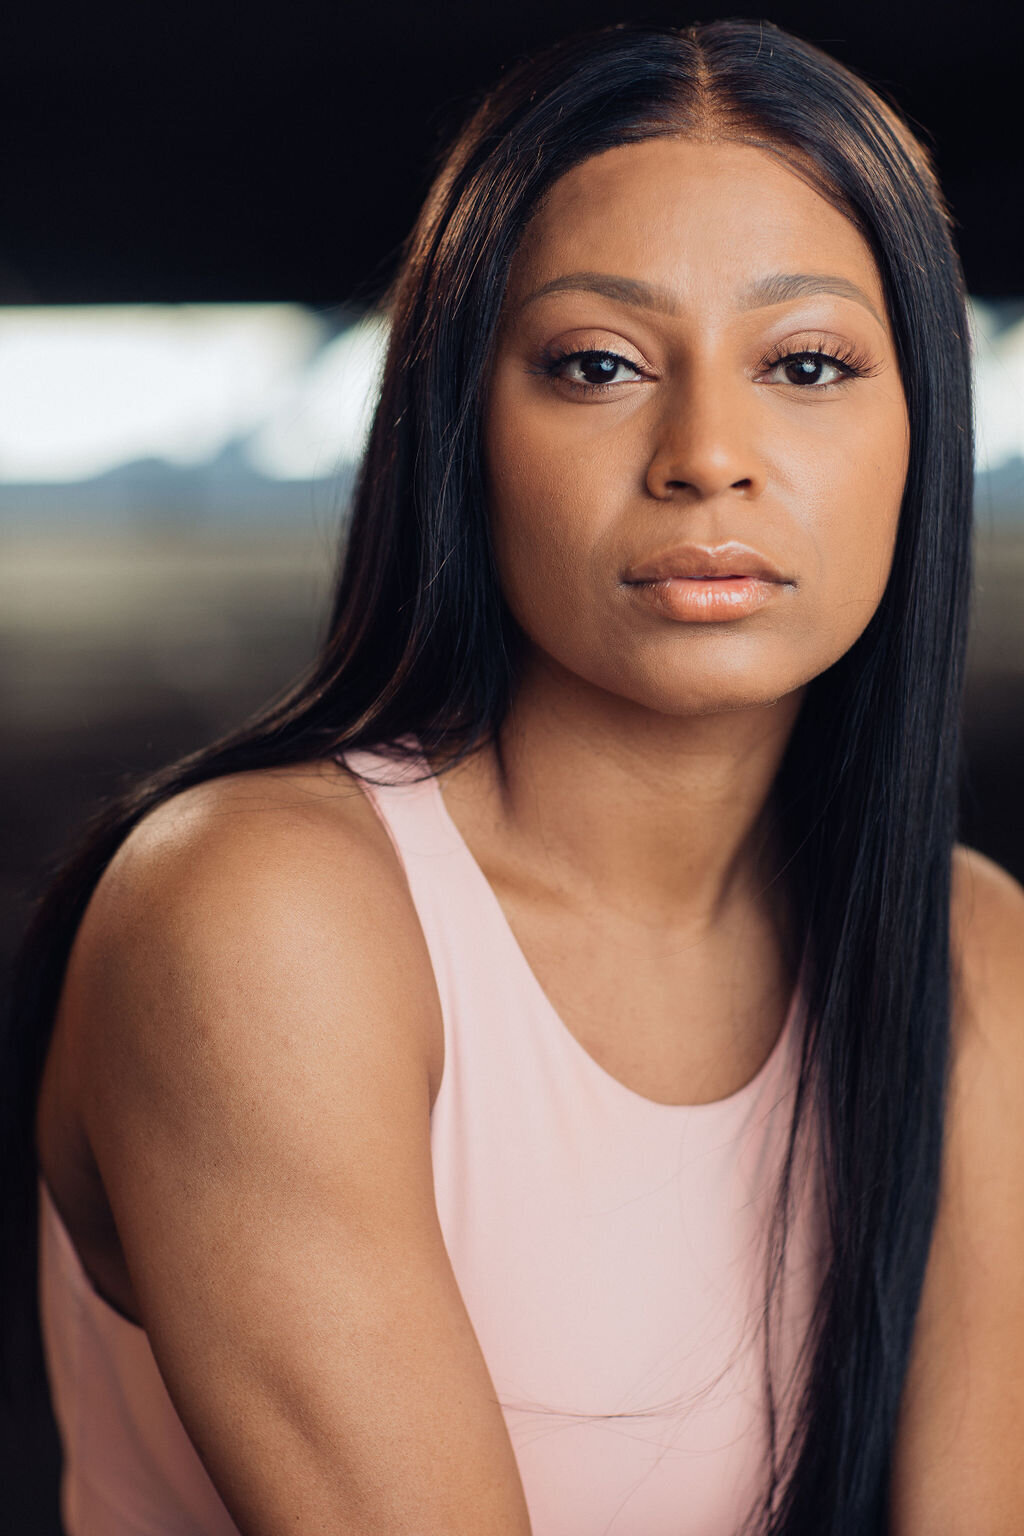 Headshot Photograph Of Woman In Light Pink Tank Top Los Angeles